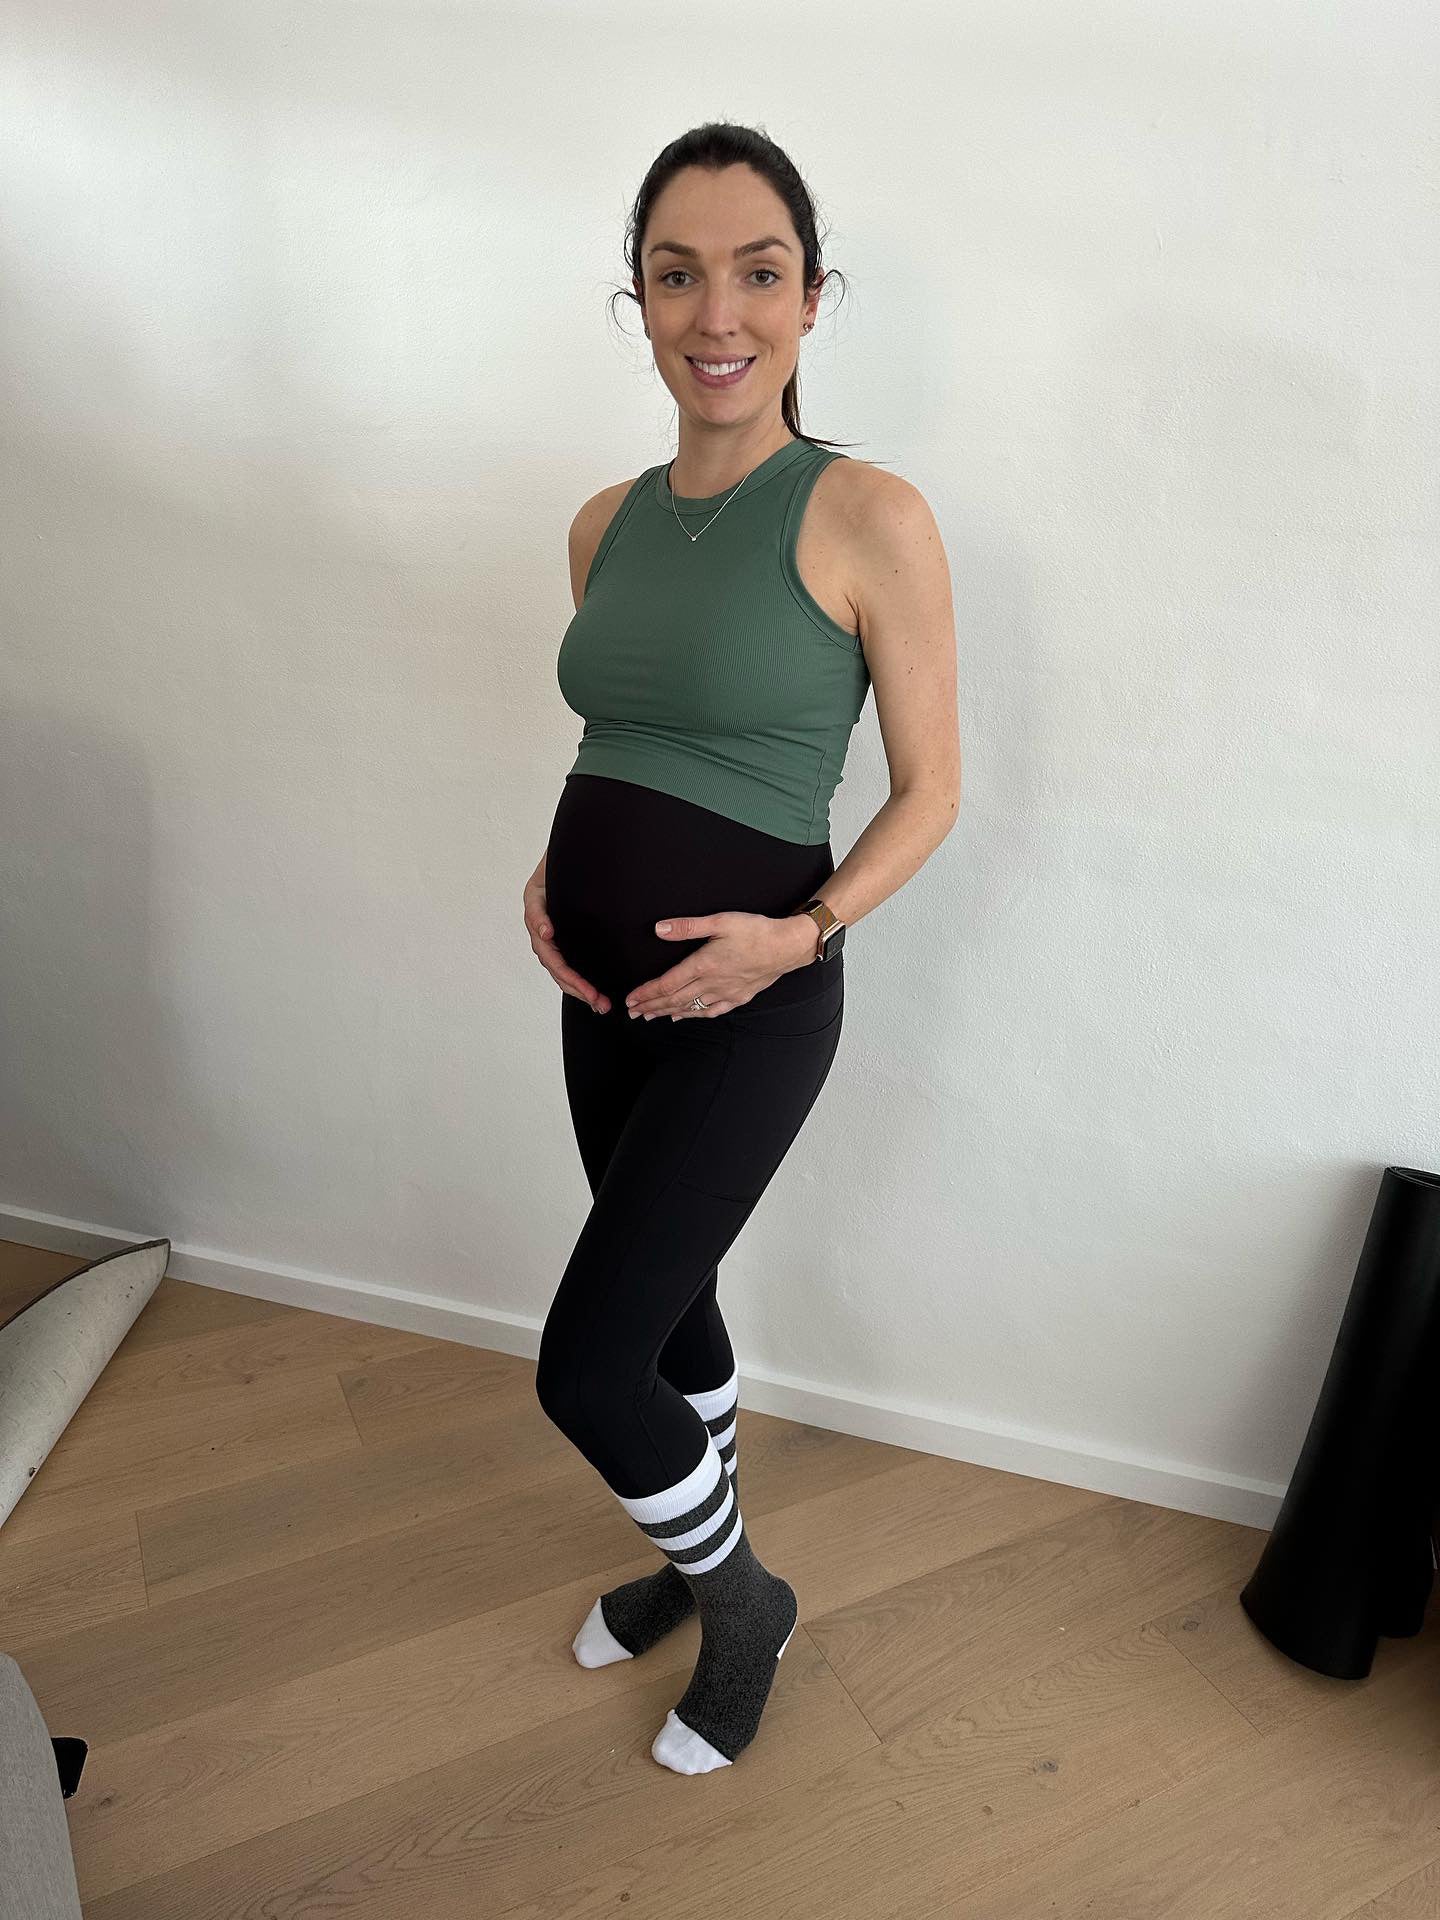 TheRY pregnancy compression leggings review - Jess Kostos women's health physio